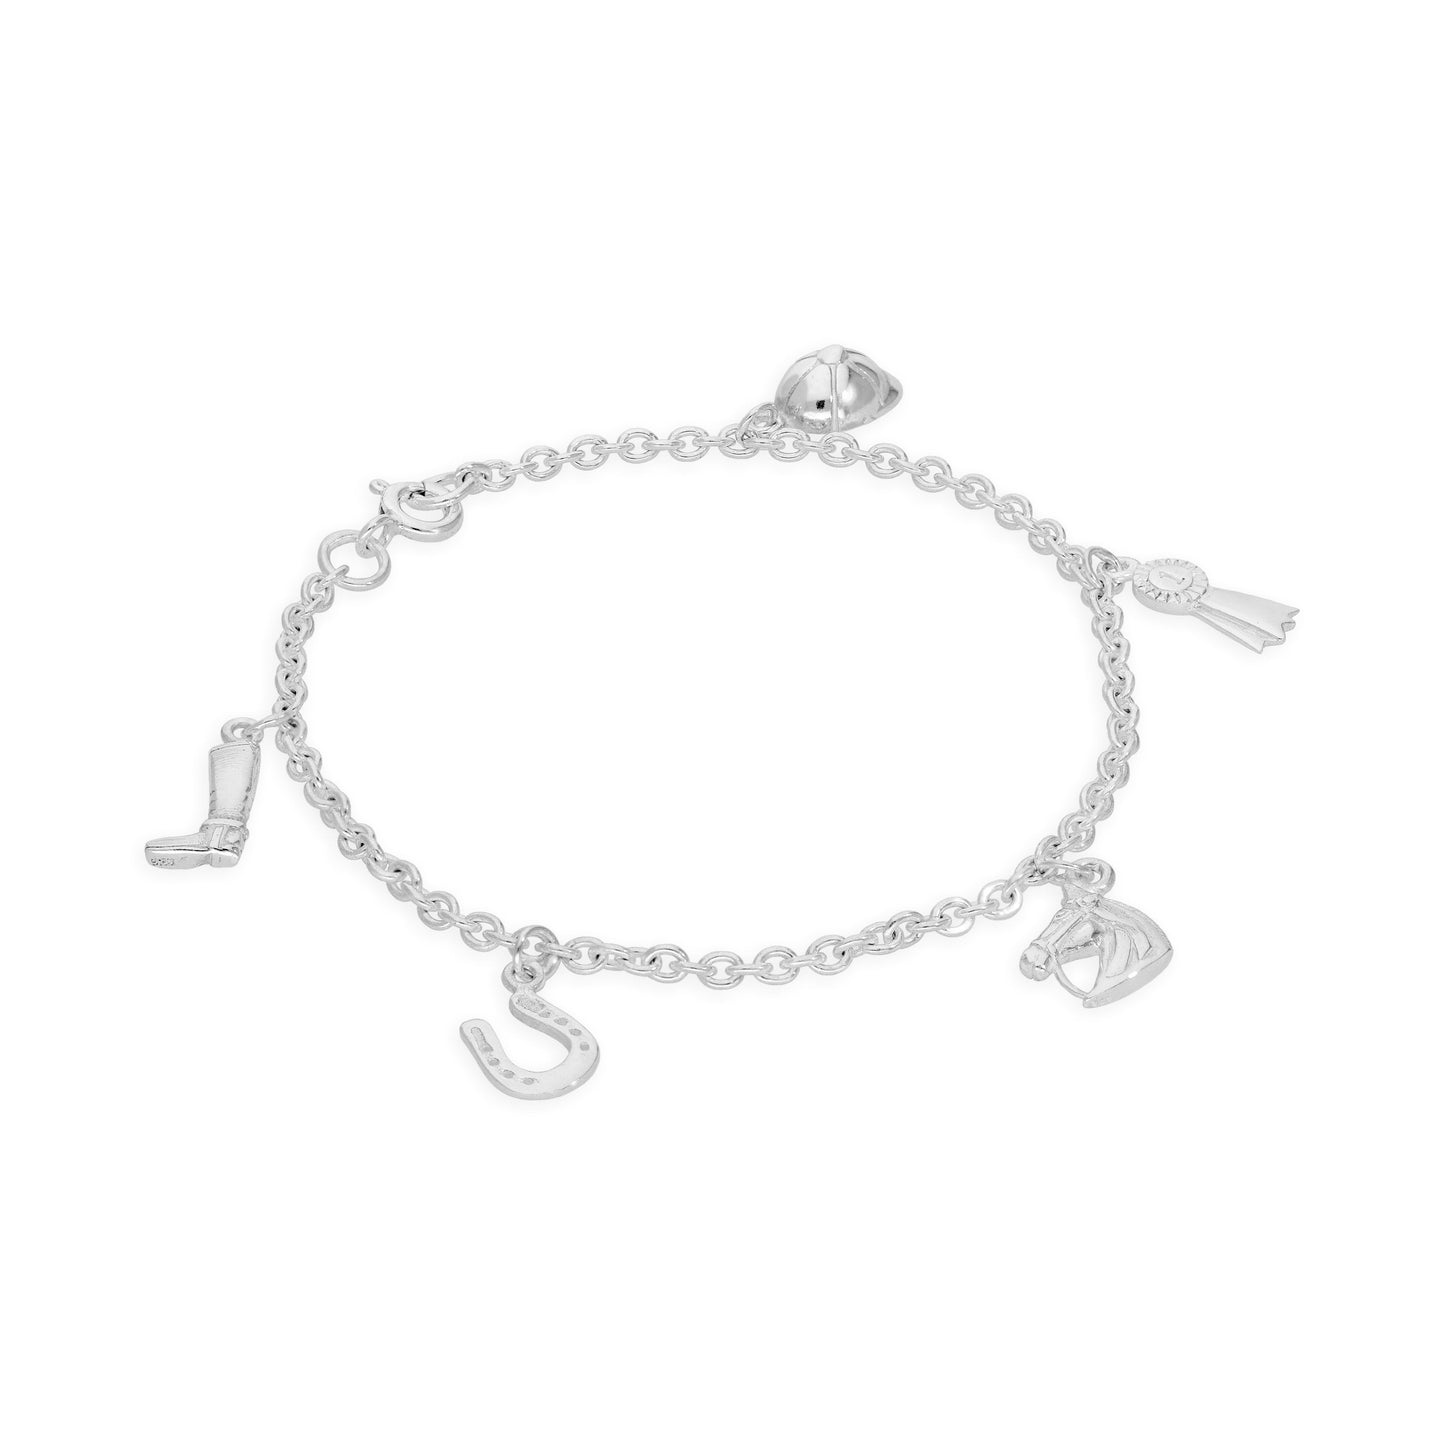 Sterling Silver 7 Inch Bracelet with Equestrian Charms